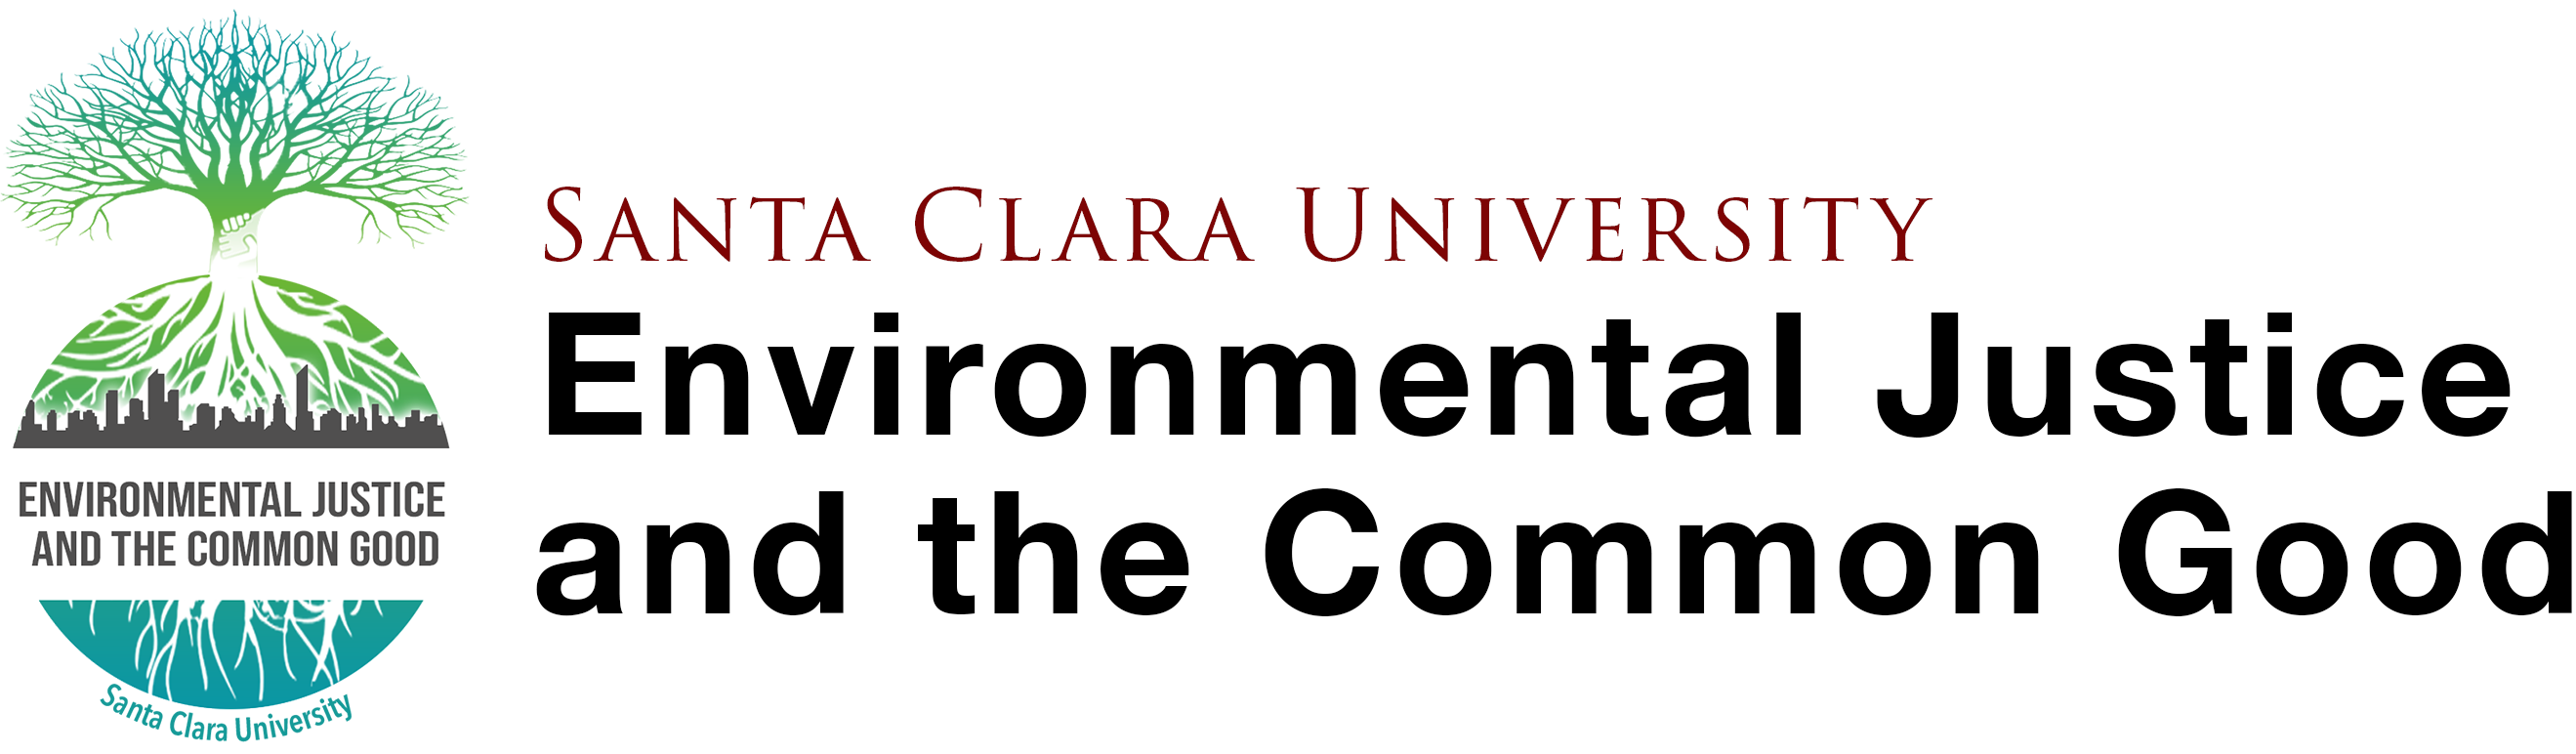  Environmental Justice and Common Good Initiative